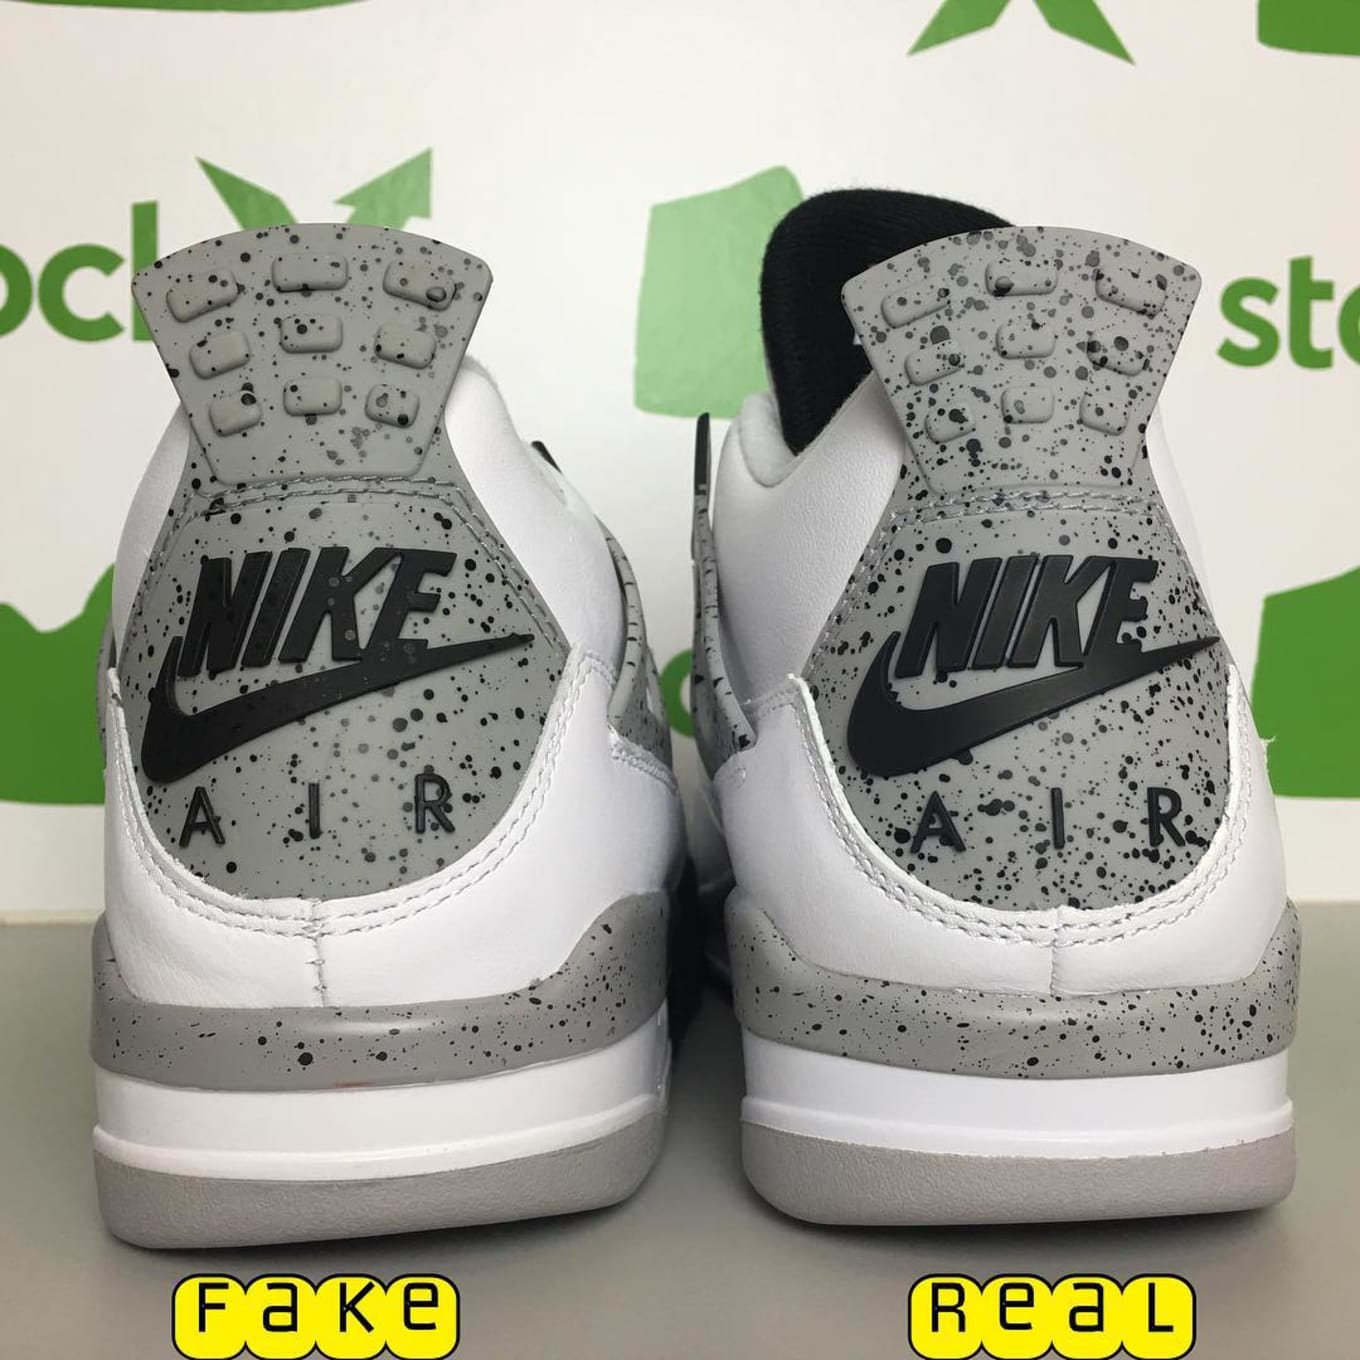 how to tell if jordan retro 4 are fake